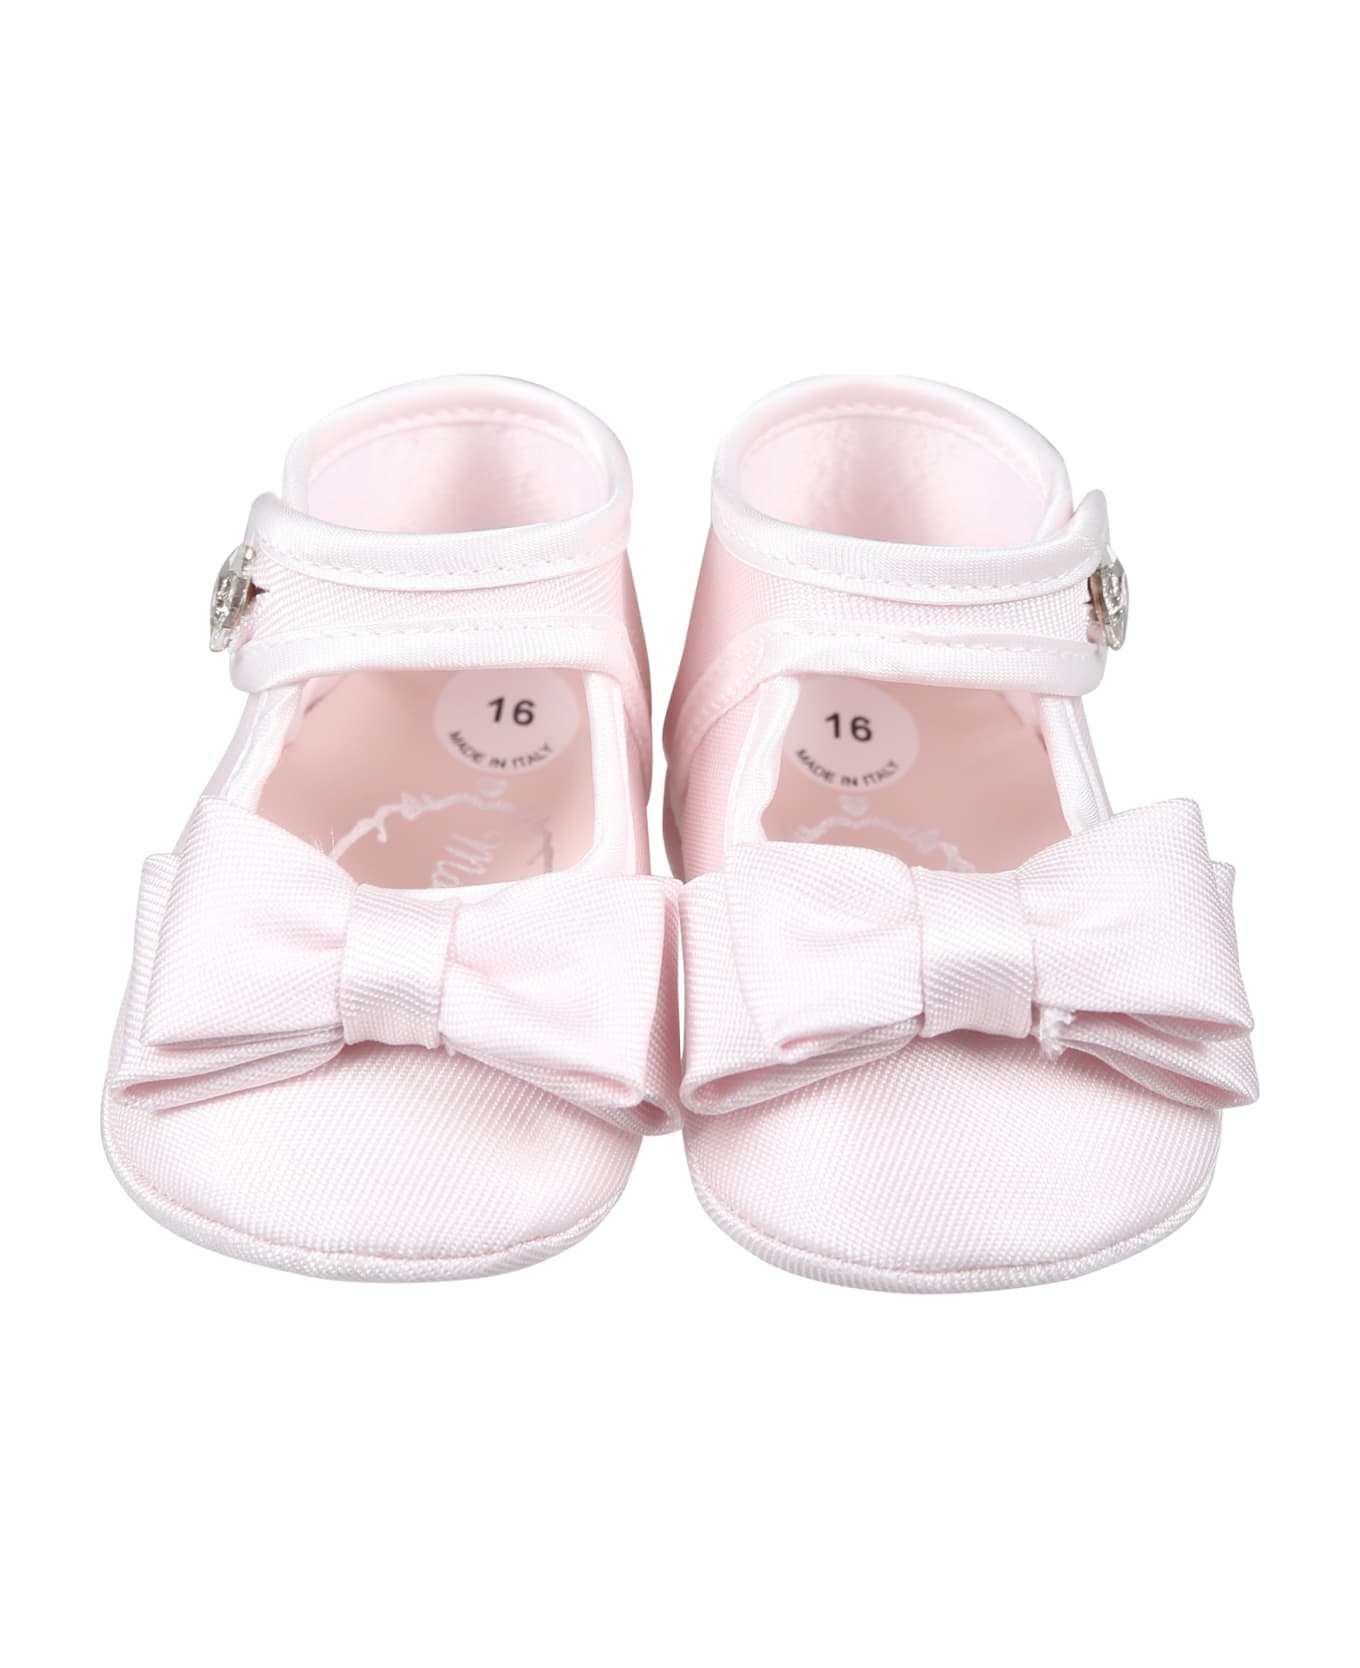 Monnalisa Pink Flat Shoes For Baby Girl With Bow - Pink シューズ